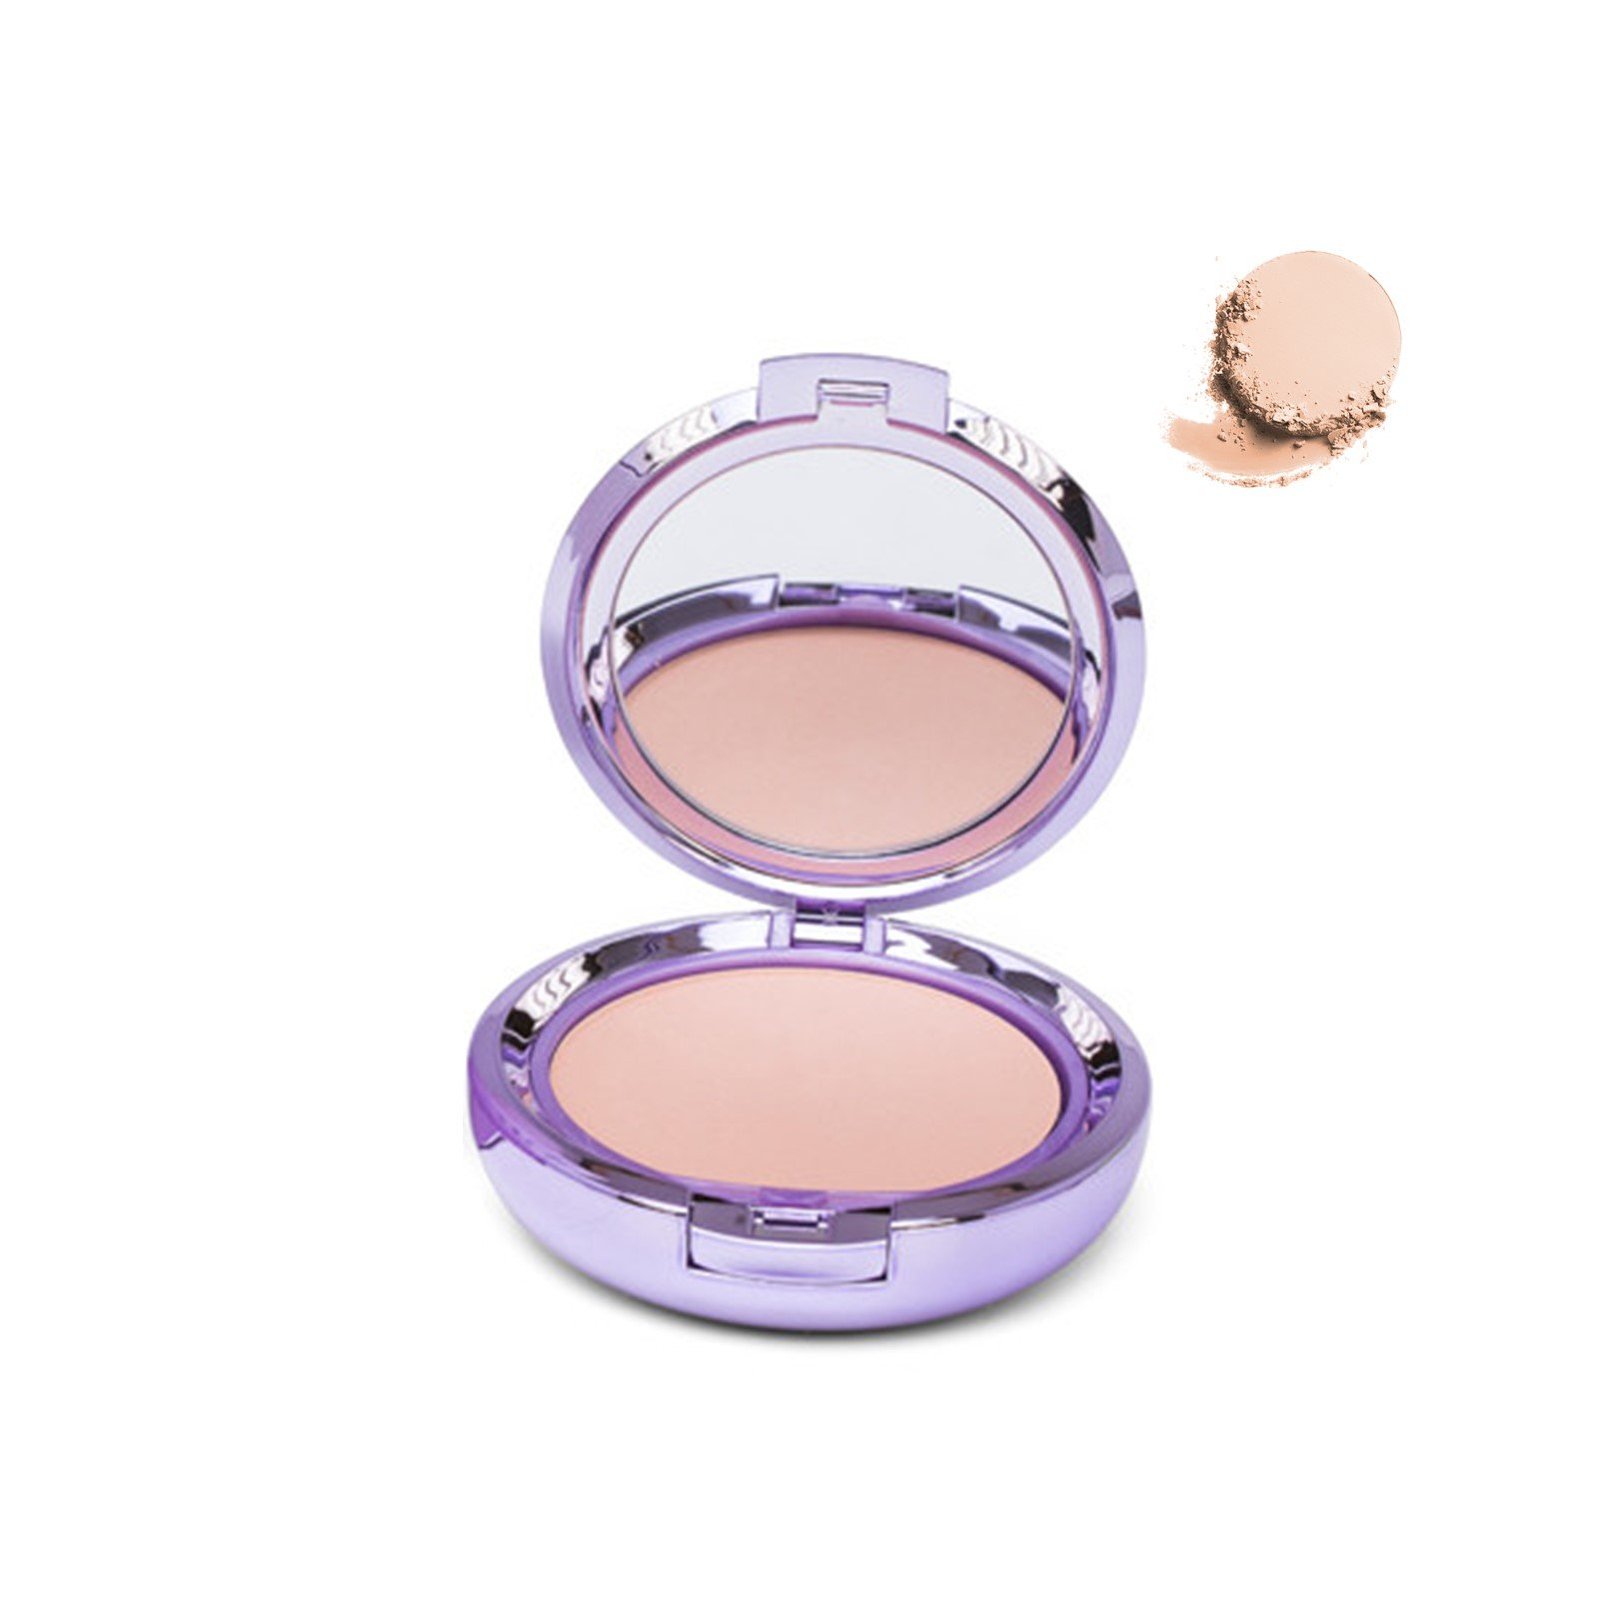 Covermark Compact Powder Oily-Acneic Skin 3 10g